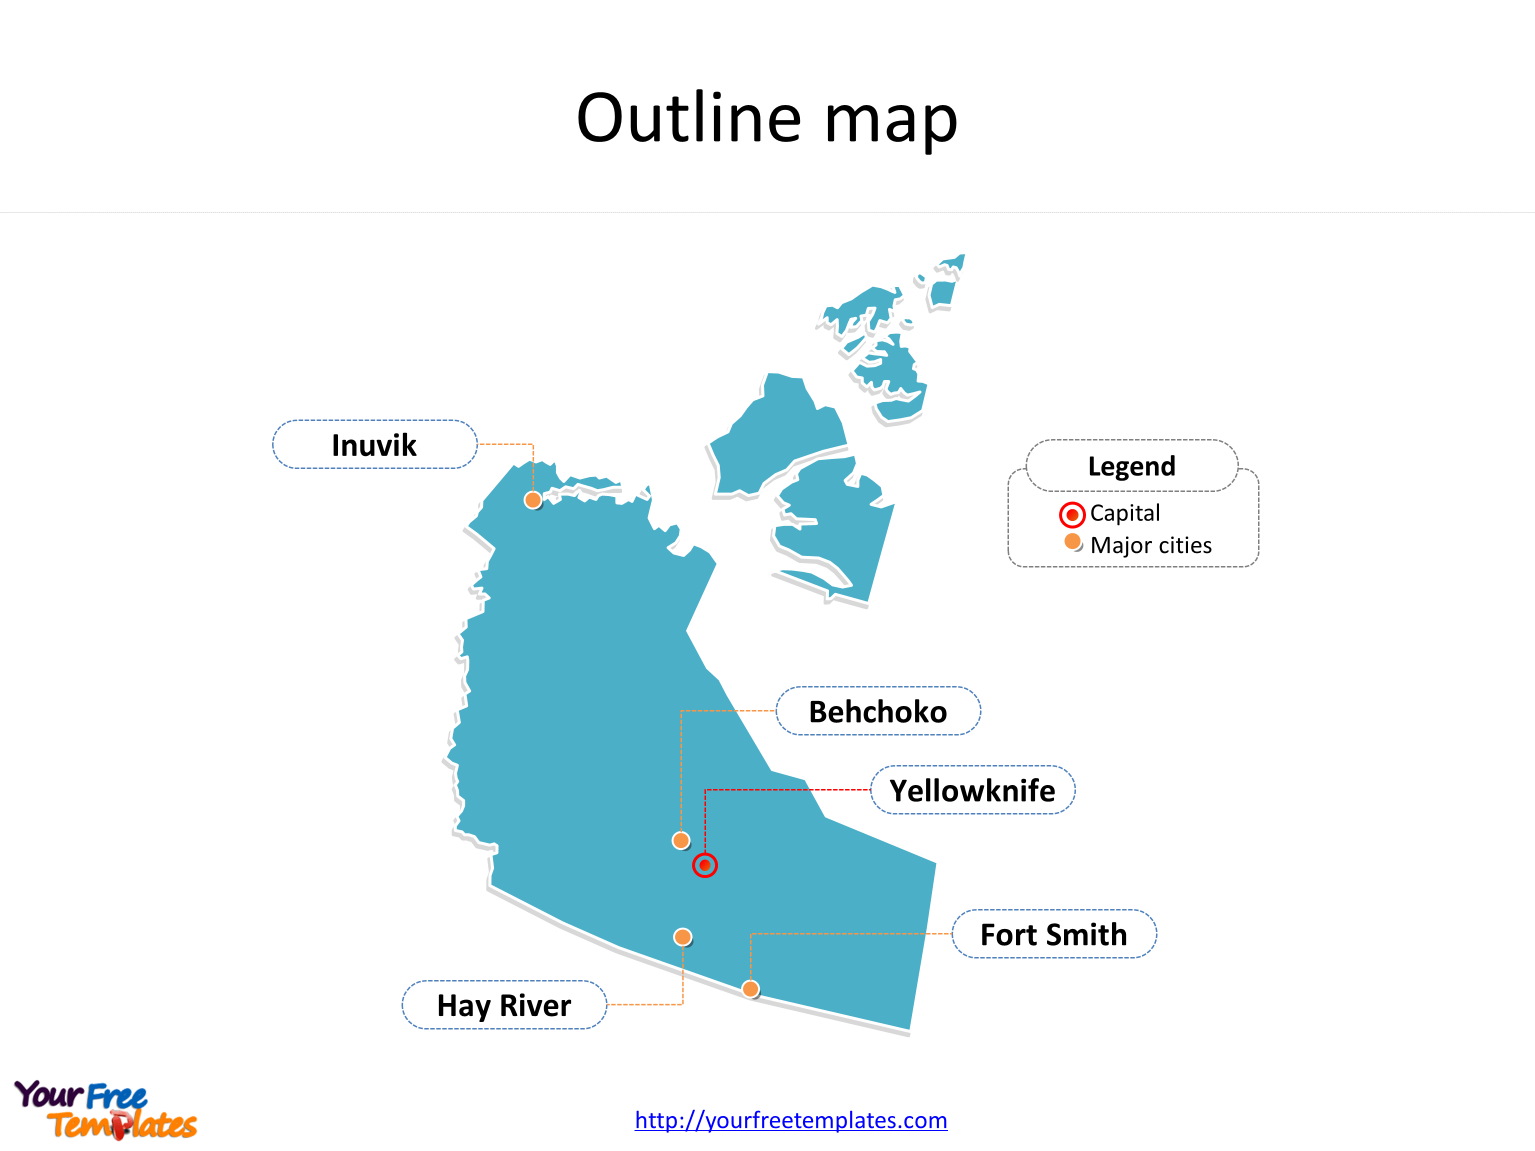 Northwest Territories map with outline and cities labeled on the Northwest Territories maps PowerPoint templates